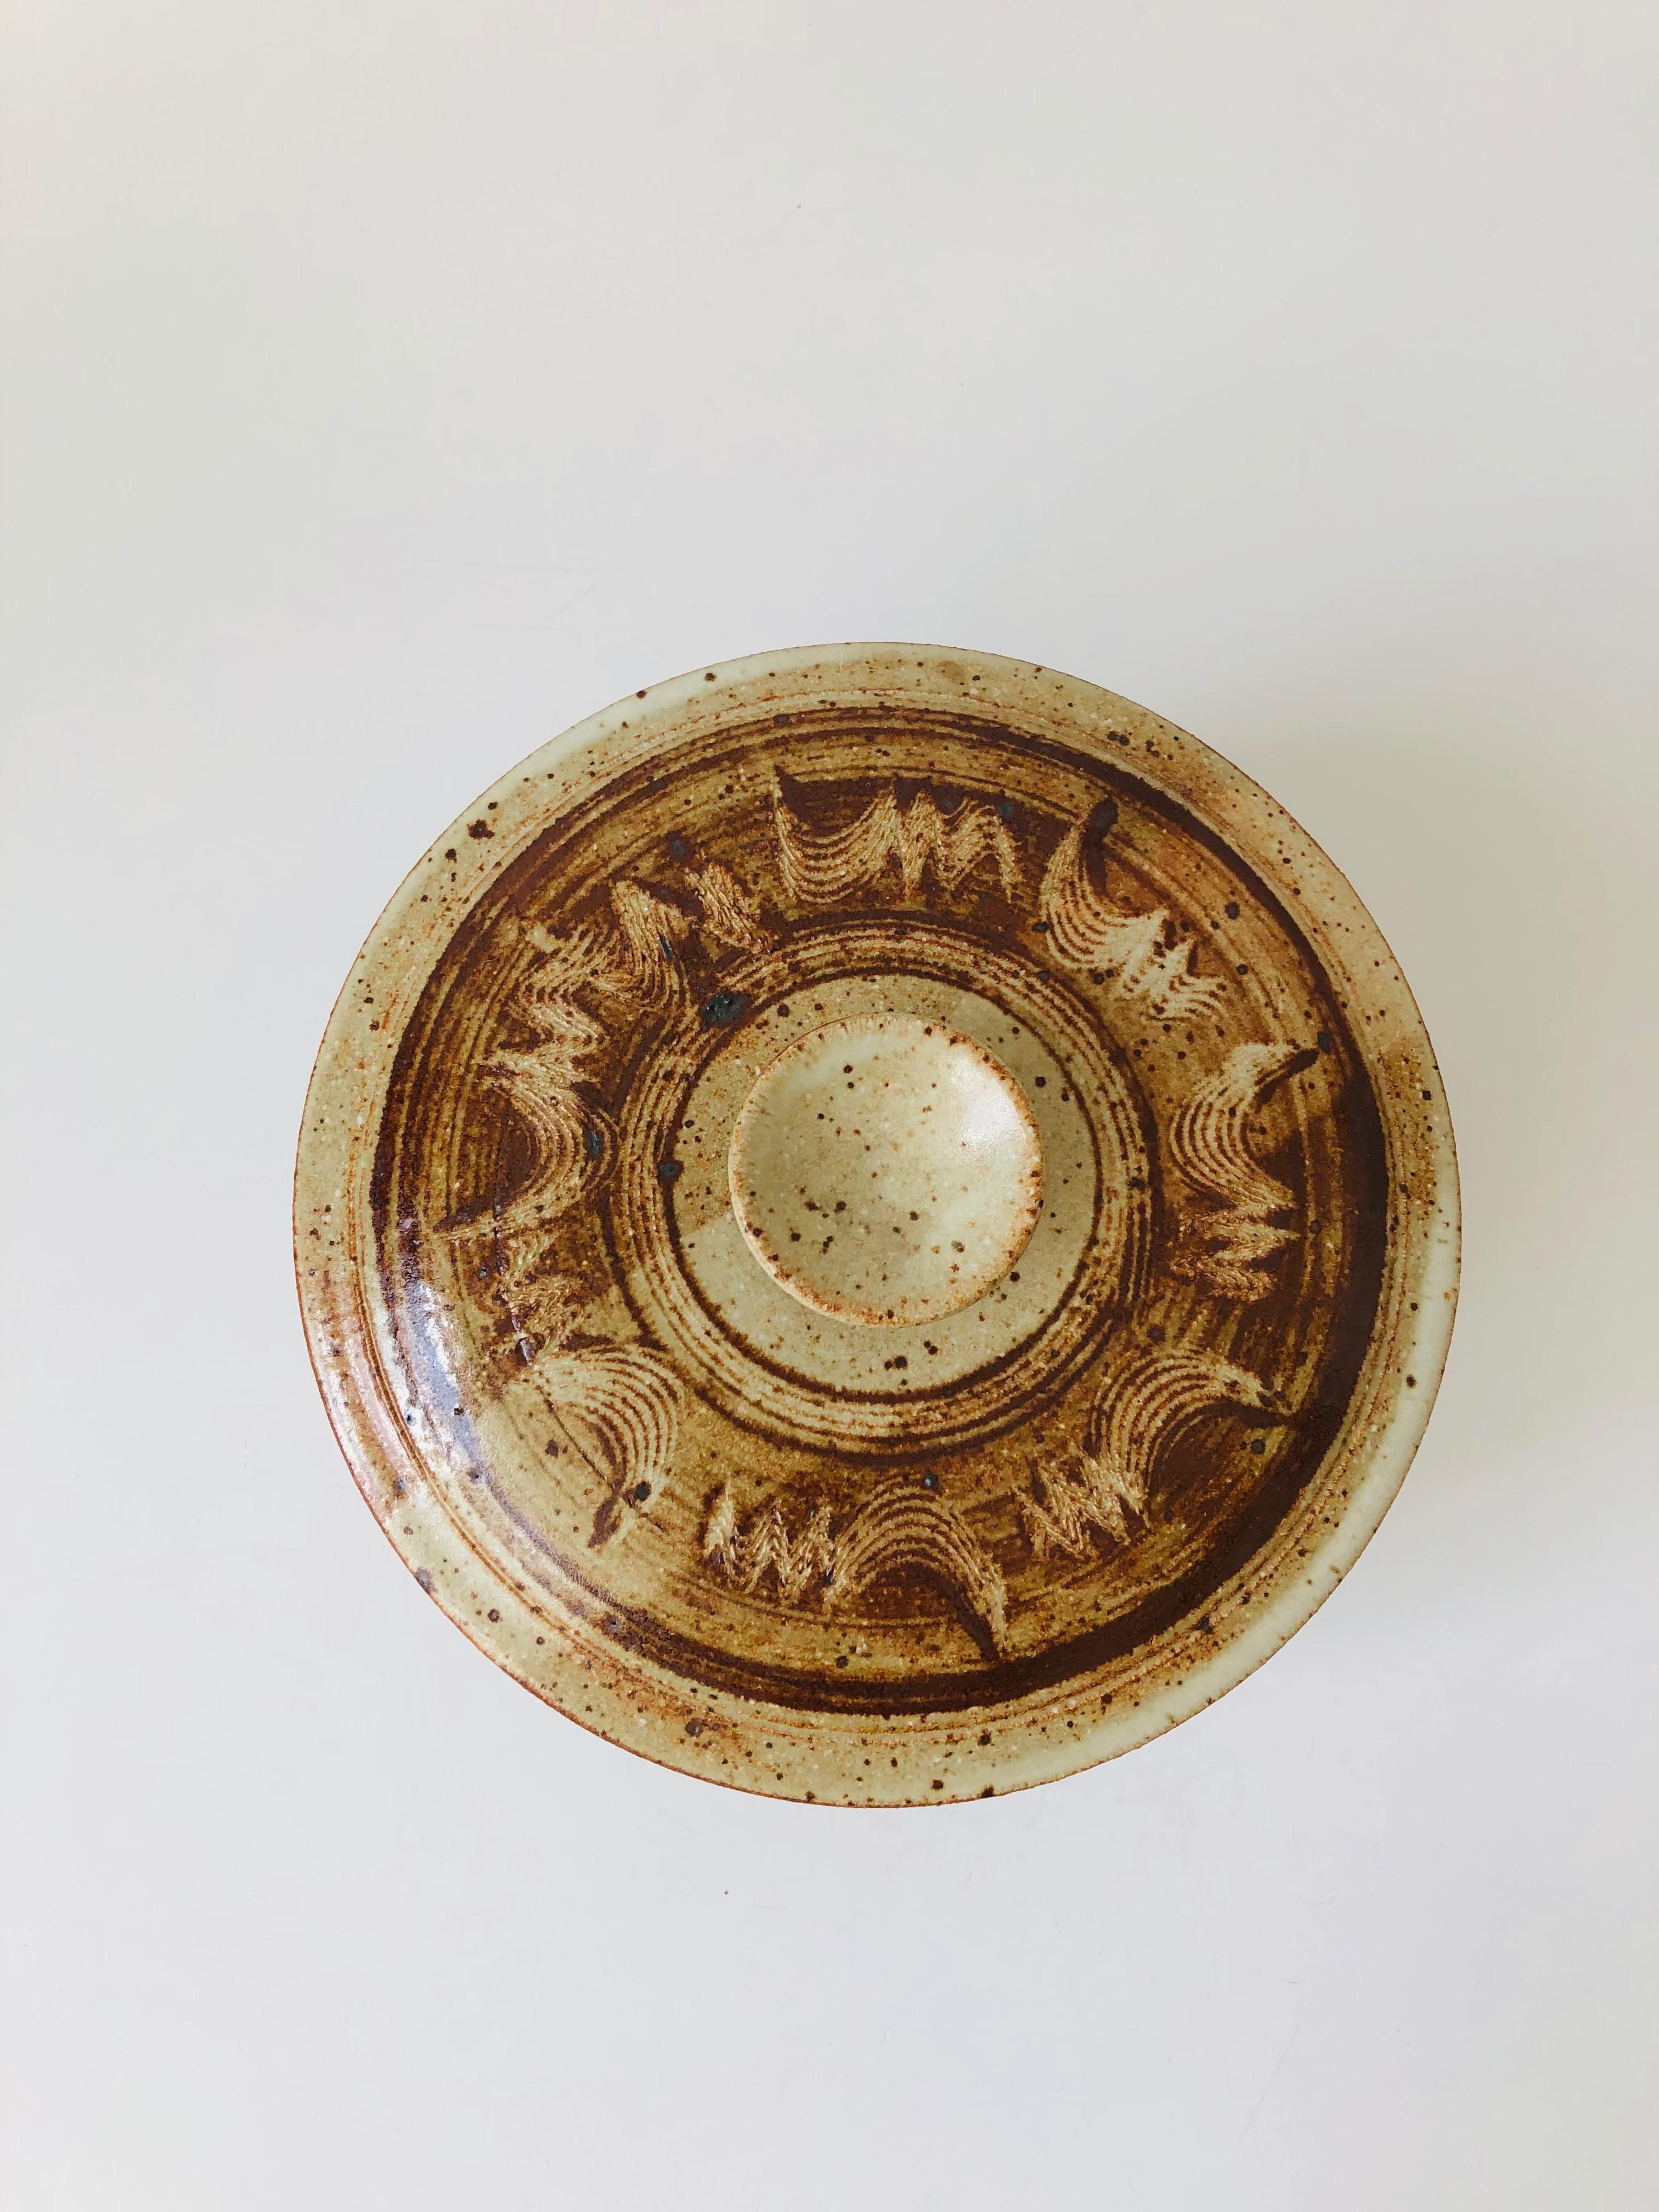 A beautiful vintage studio pottery lidded serving bowl. Features a handpainted design in earth tone colors. Nice size, perfect for serving a variety of dishes. Signed on the base by the maker and dated 1980.
  